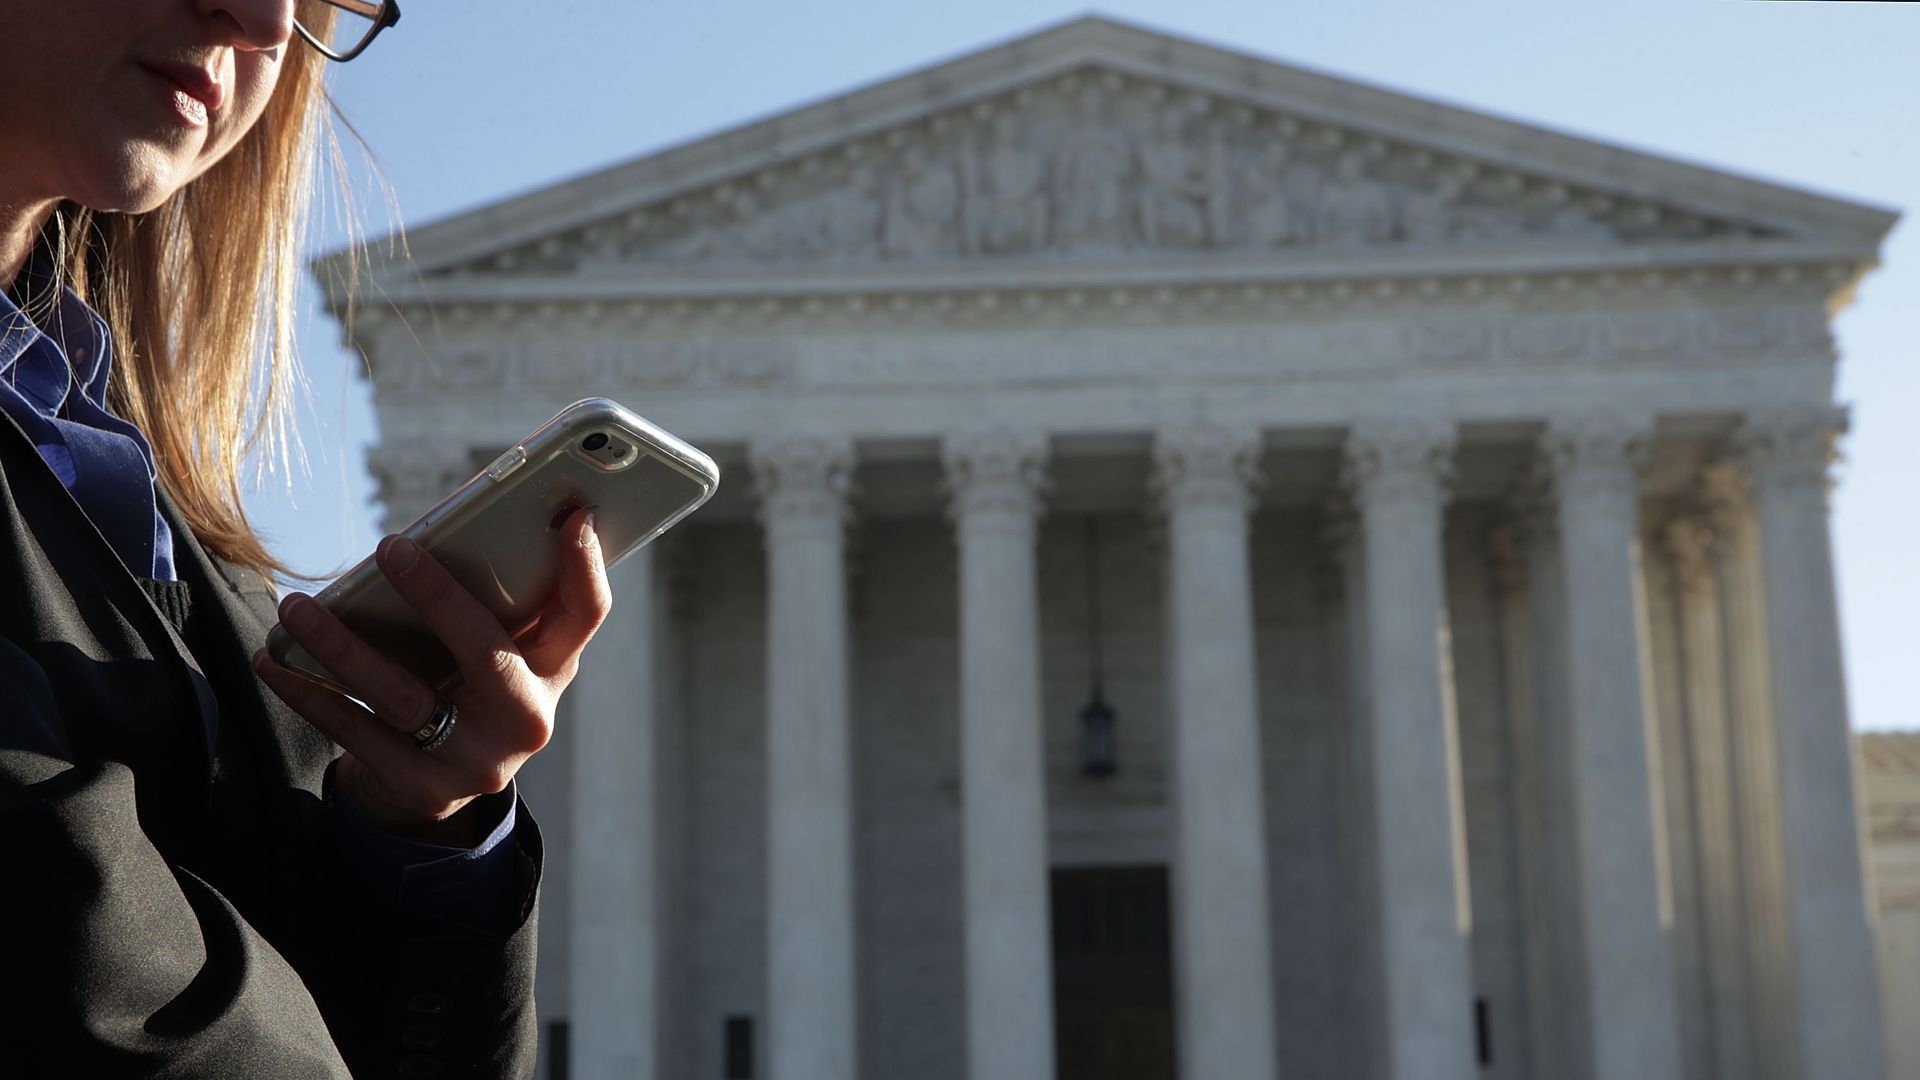 A woman checks her cell phone as she waits in line to enter the U.S. Supreme Court 